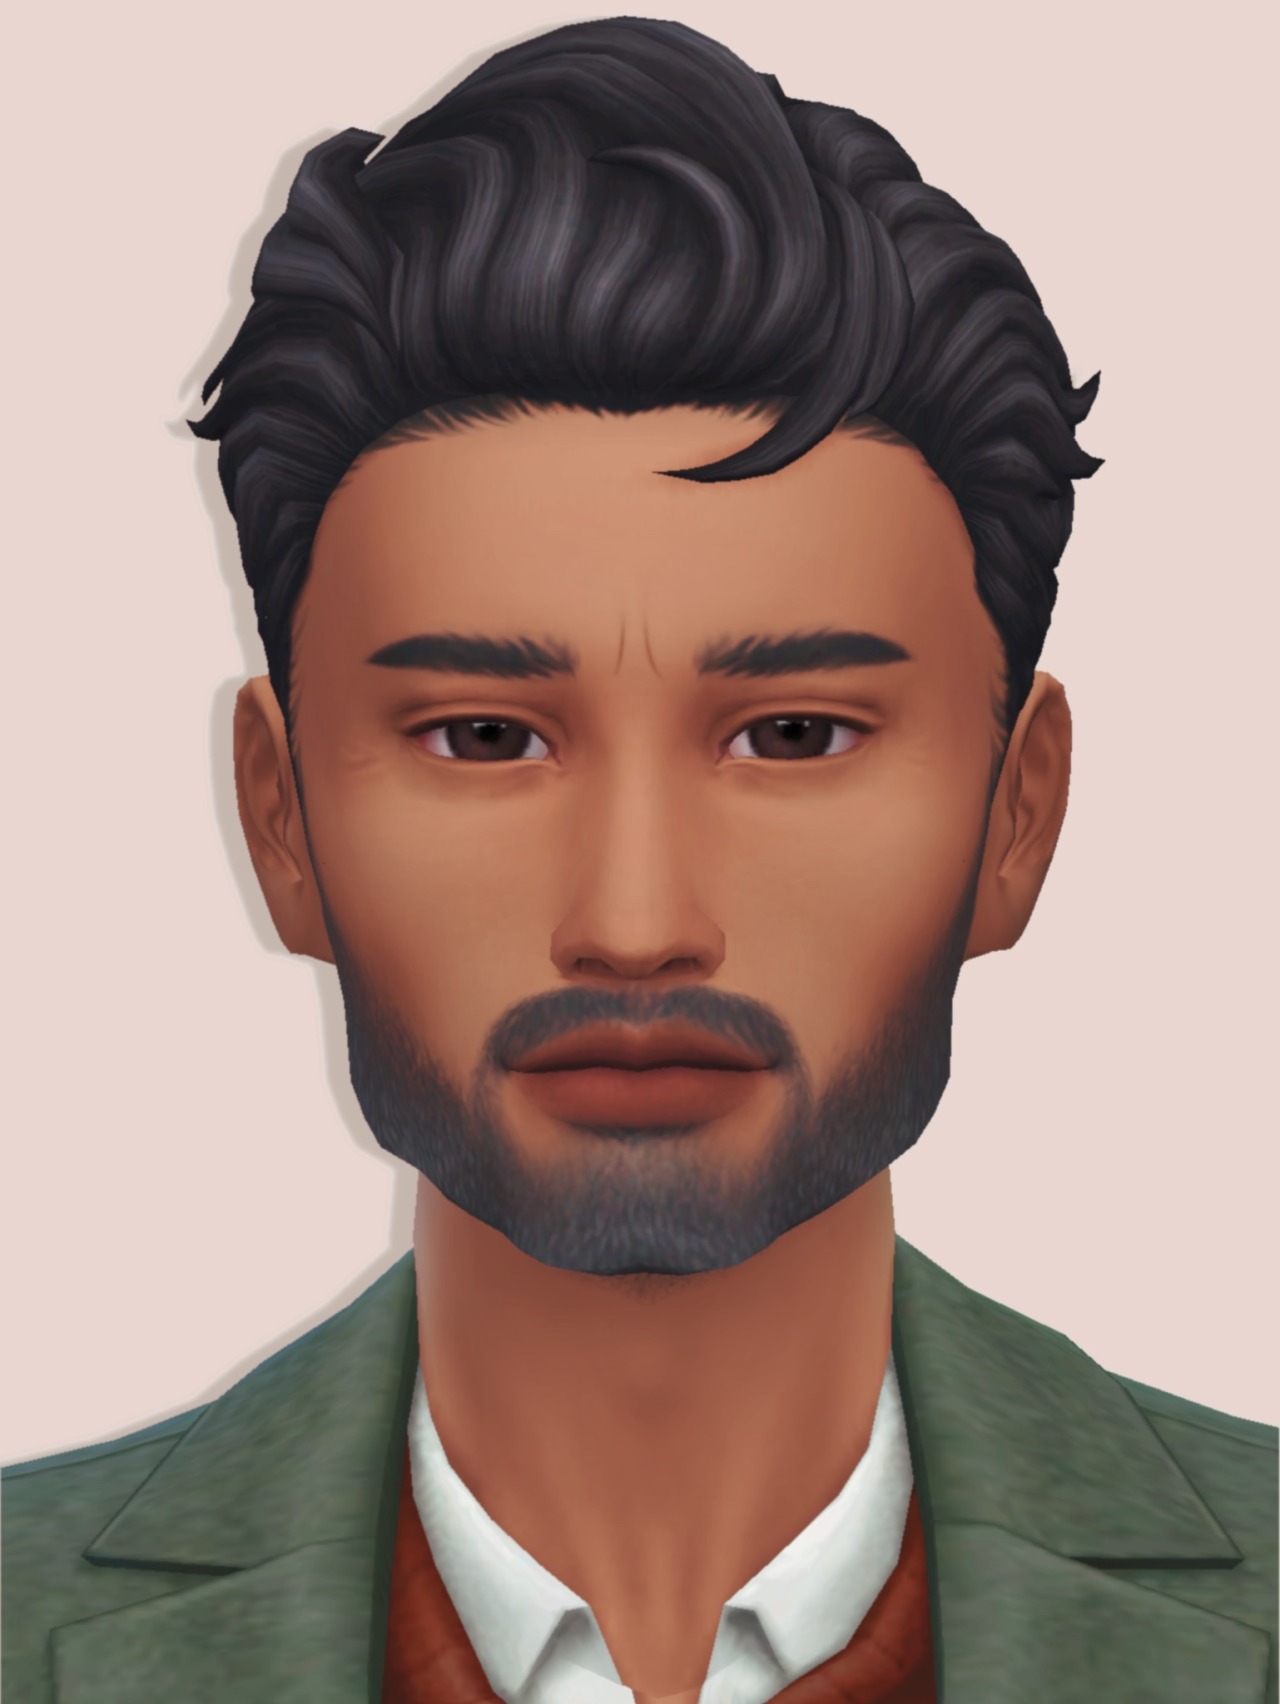 Sims 4 Decided I Needed Another Male Sim The Game Misty Meadows : Dump ...